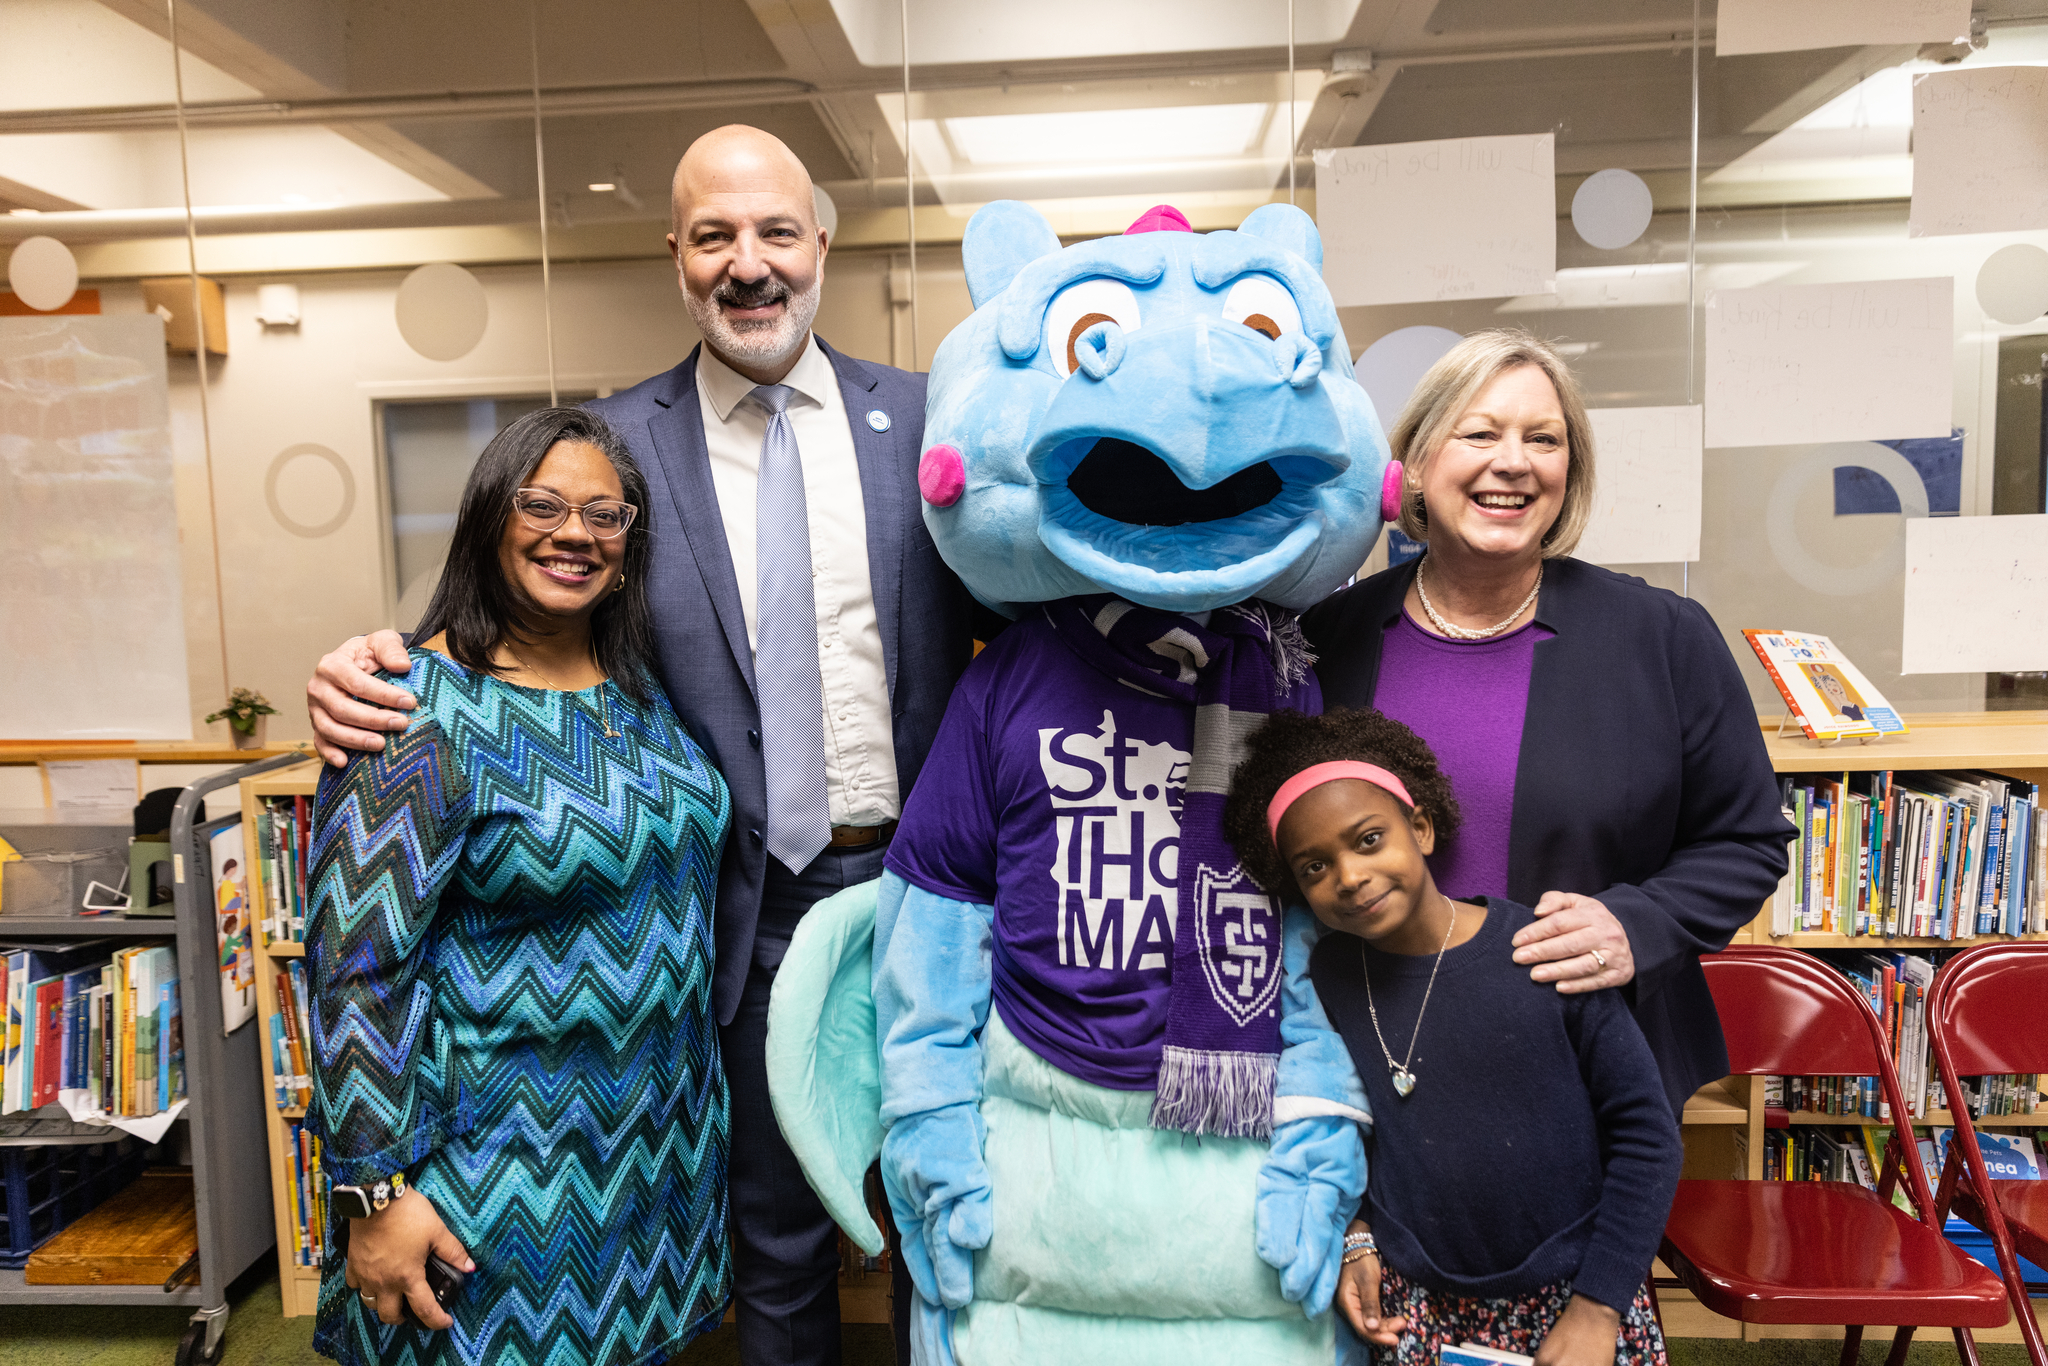 SPPS Superintendent Dr. Joe Gothard, Maxfield Principal Dr. Leslie Hitchens and School of Education Dean Amy Smith, Anna McCulloch and daughter Nelly pose after announcement that Saint Paul Public School Maxfield Elementary has been named a Collaborative Learning School